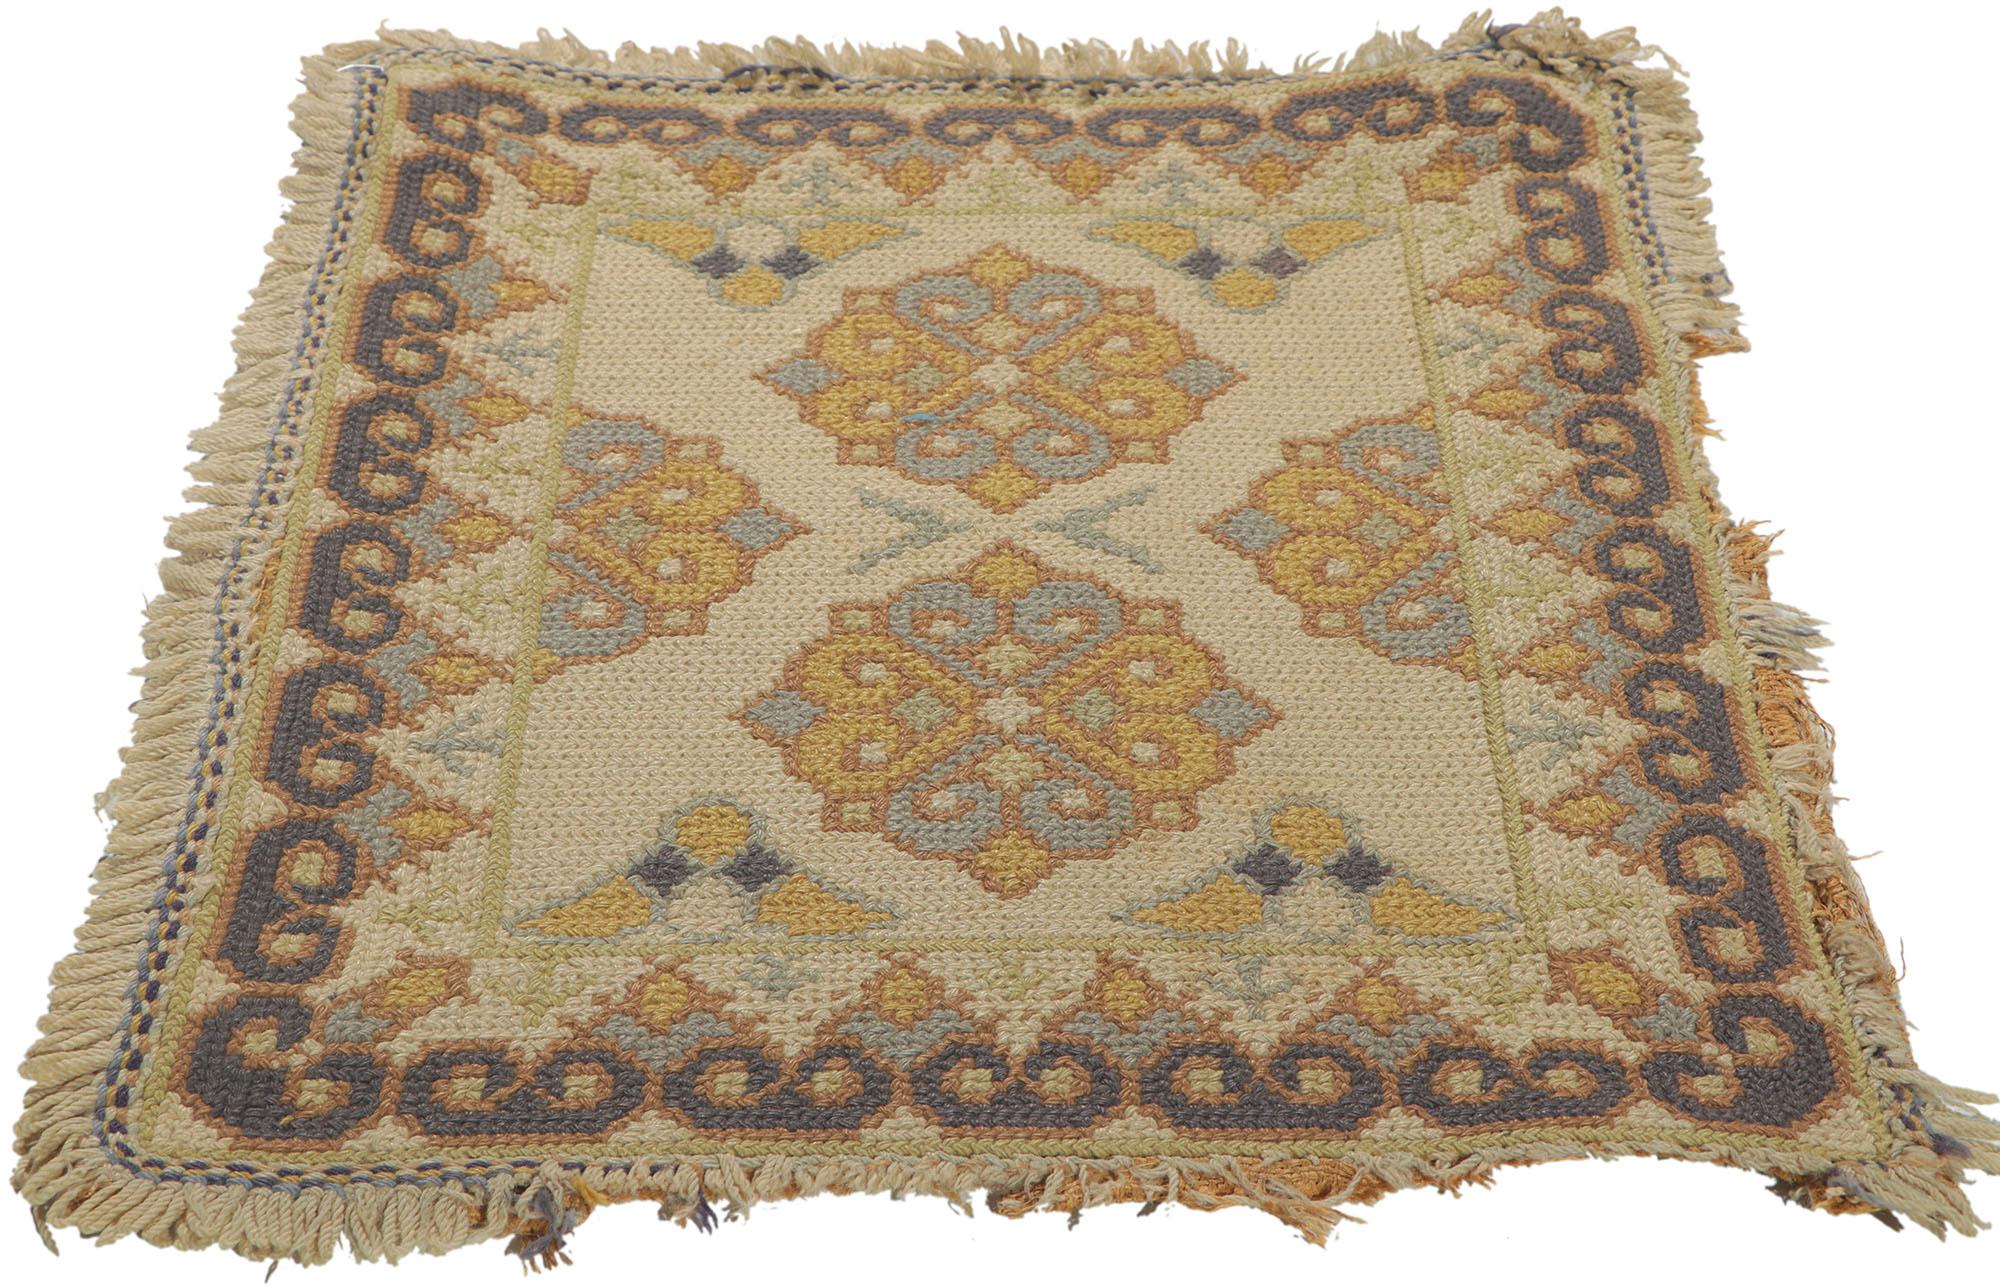 French Provincial Antique Portuguese Arraiolos Needlepoint Rug For Sale